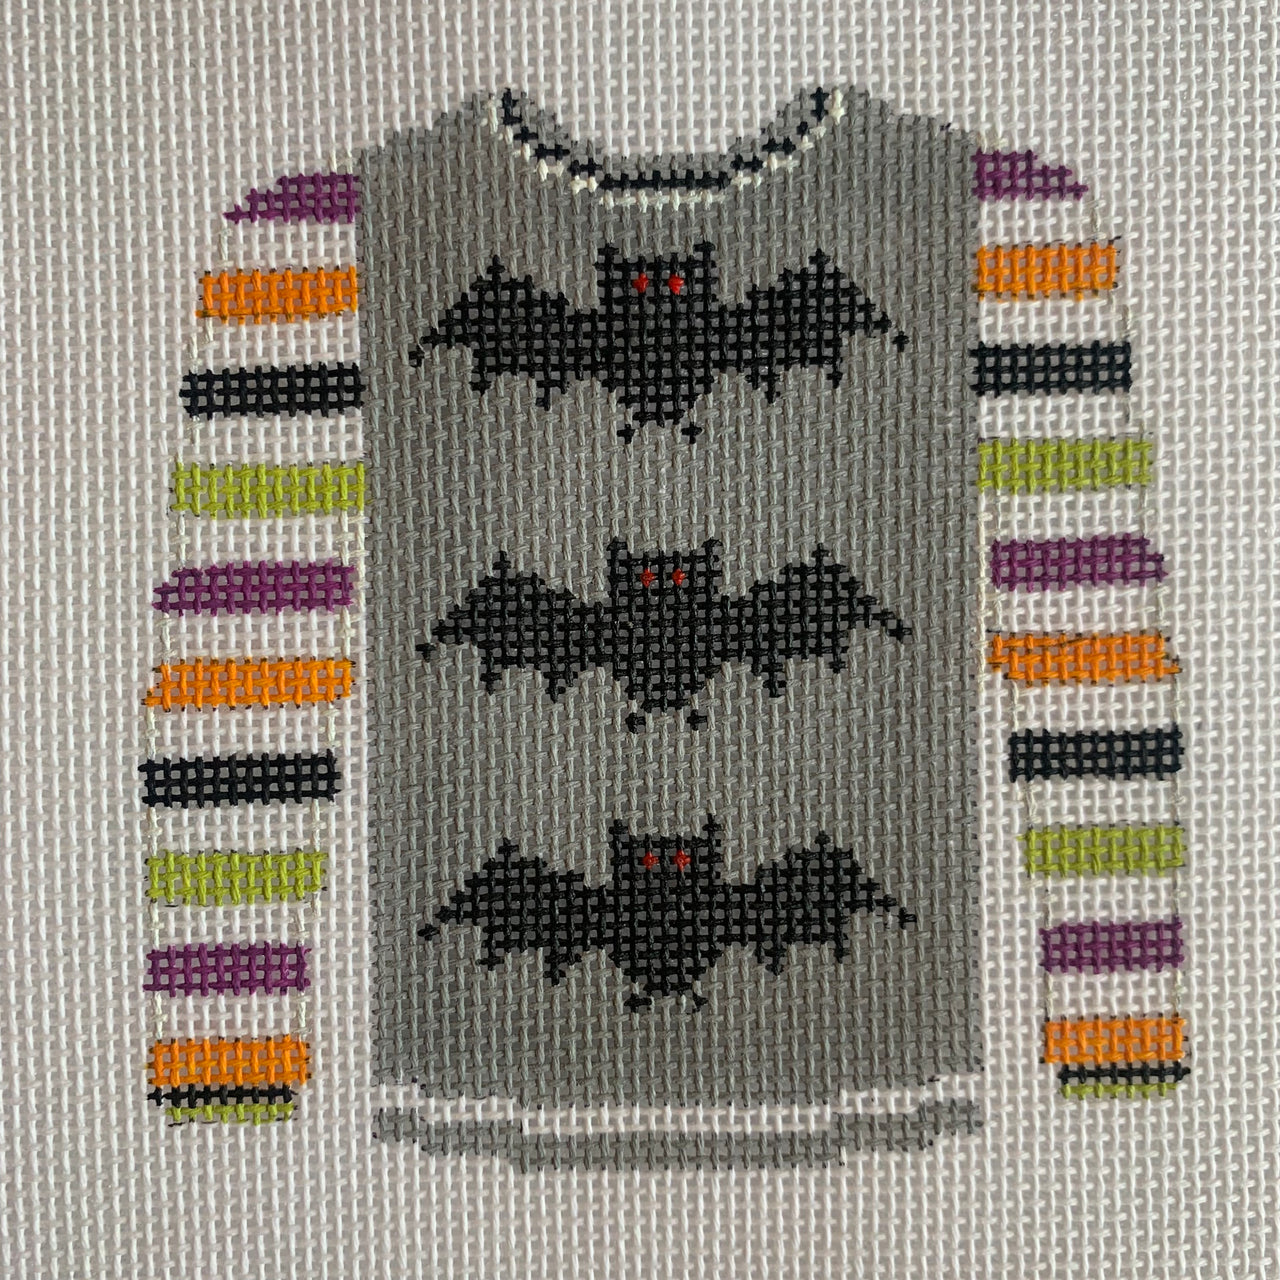 KKO220H 3 bats on gray sweater with multicolored sleeve